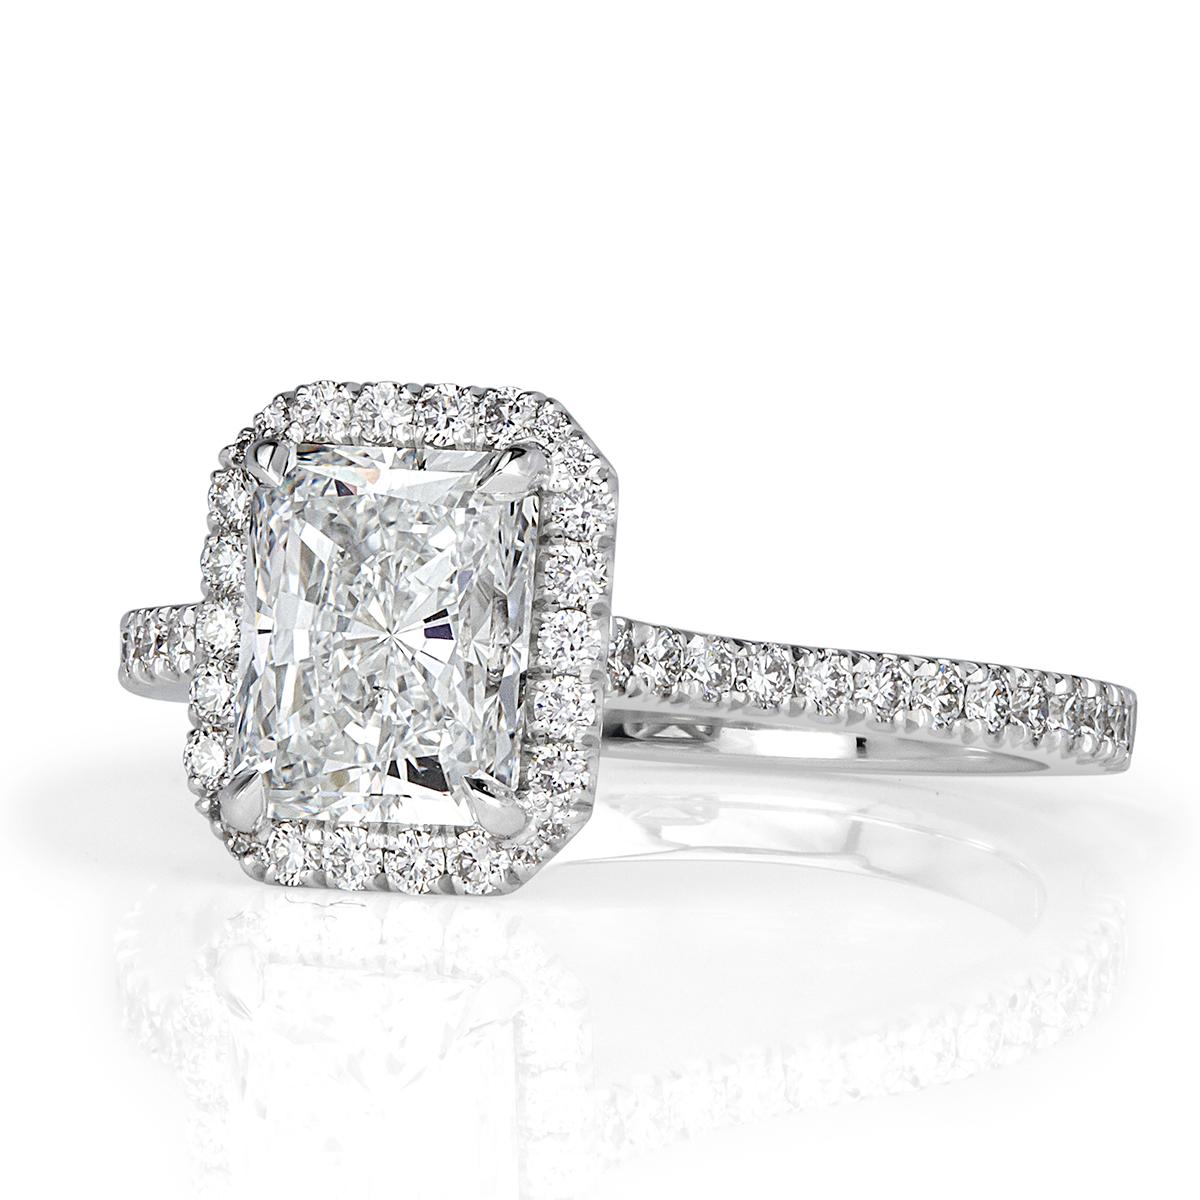 Created in high polish platinum, this stunning diamond engagement ring showcases a gorgeous 1.52ct radiant cut center diamond, GIA certified at H-VVS1. It measures an incredible 7.76 x 6.03mm! It is complimented by a dainty halo of round brilliant